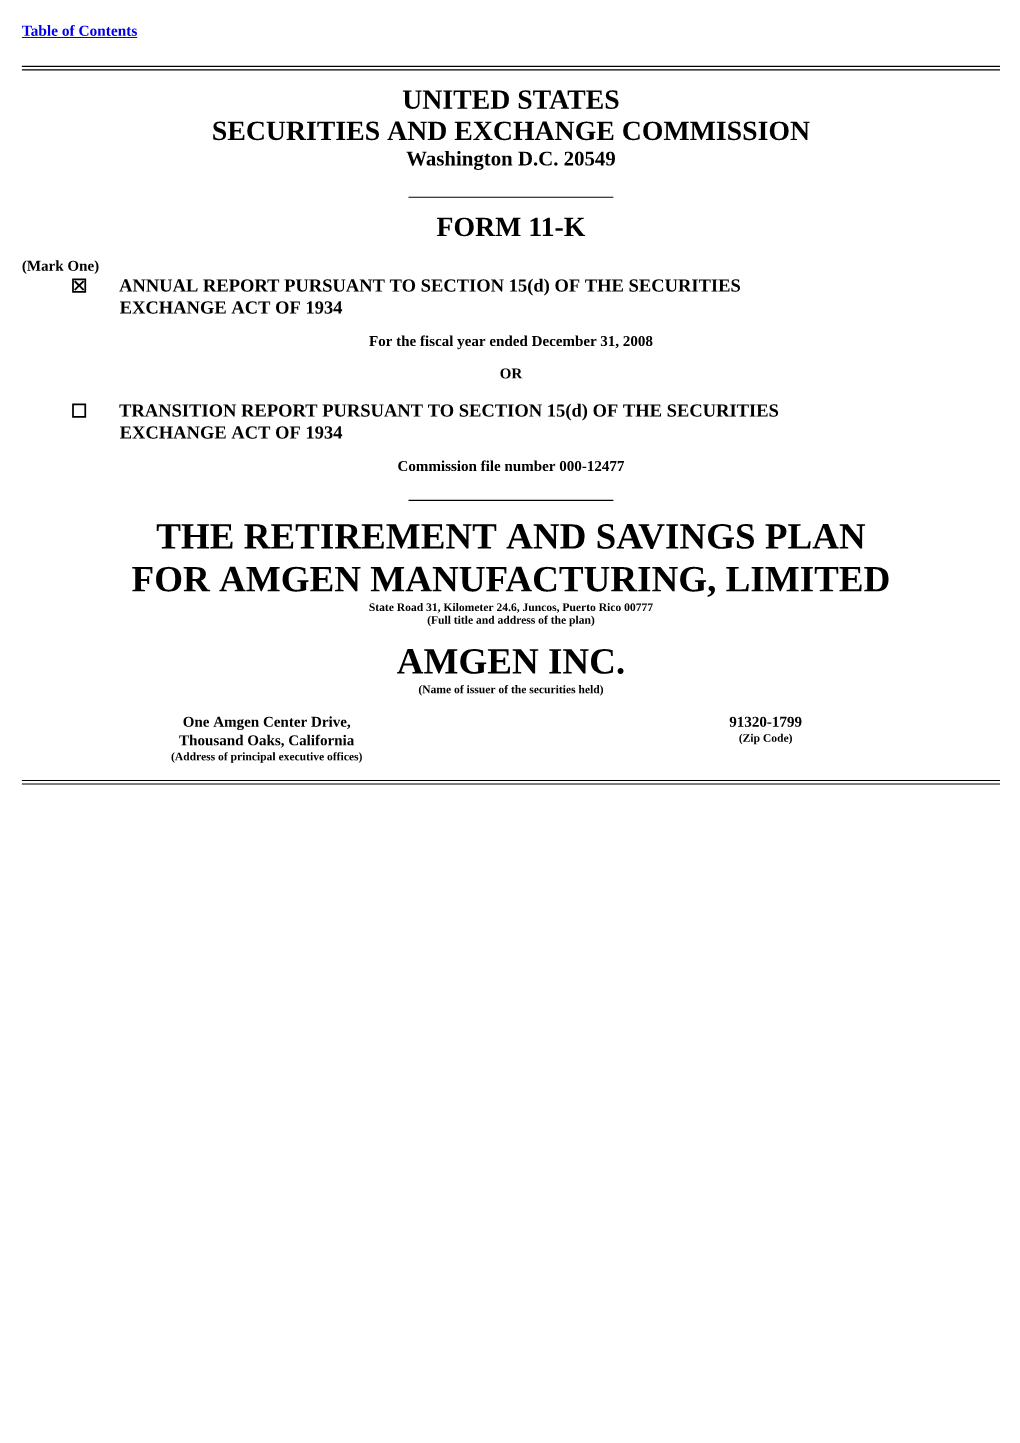 The Retirement and Savings Plan for Amgen Manufacturing, Limited Amgen Inc